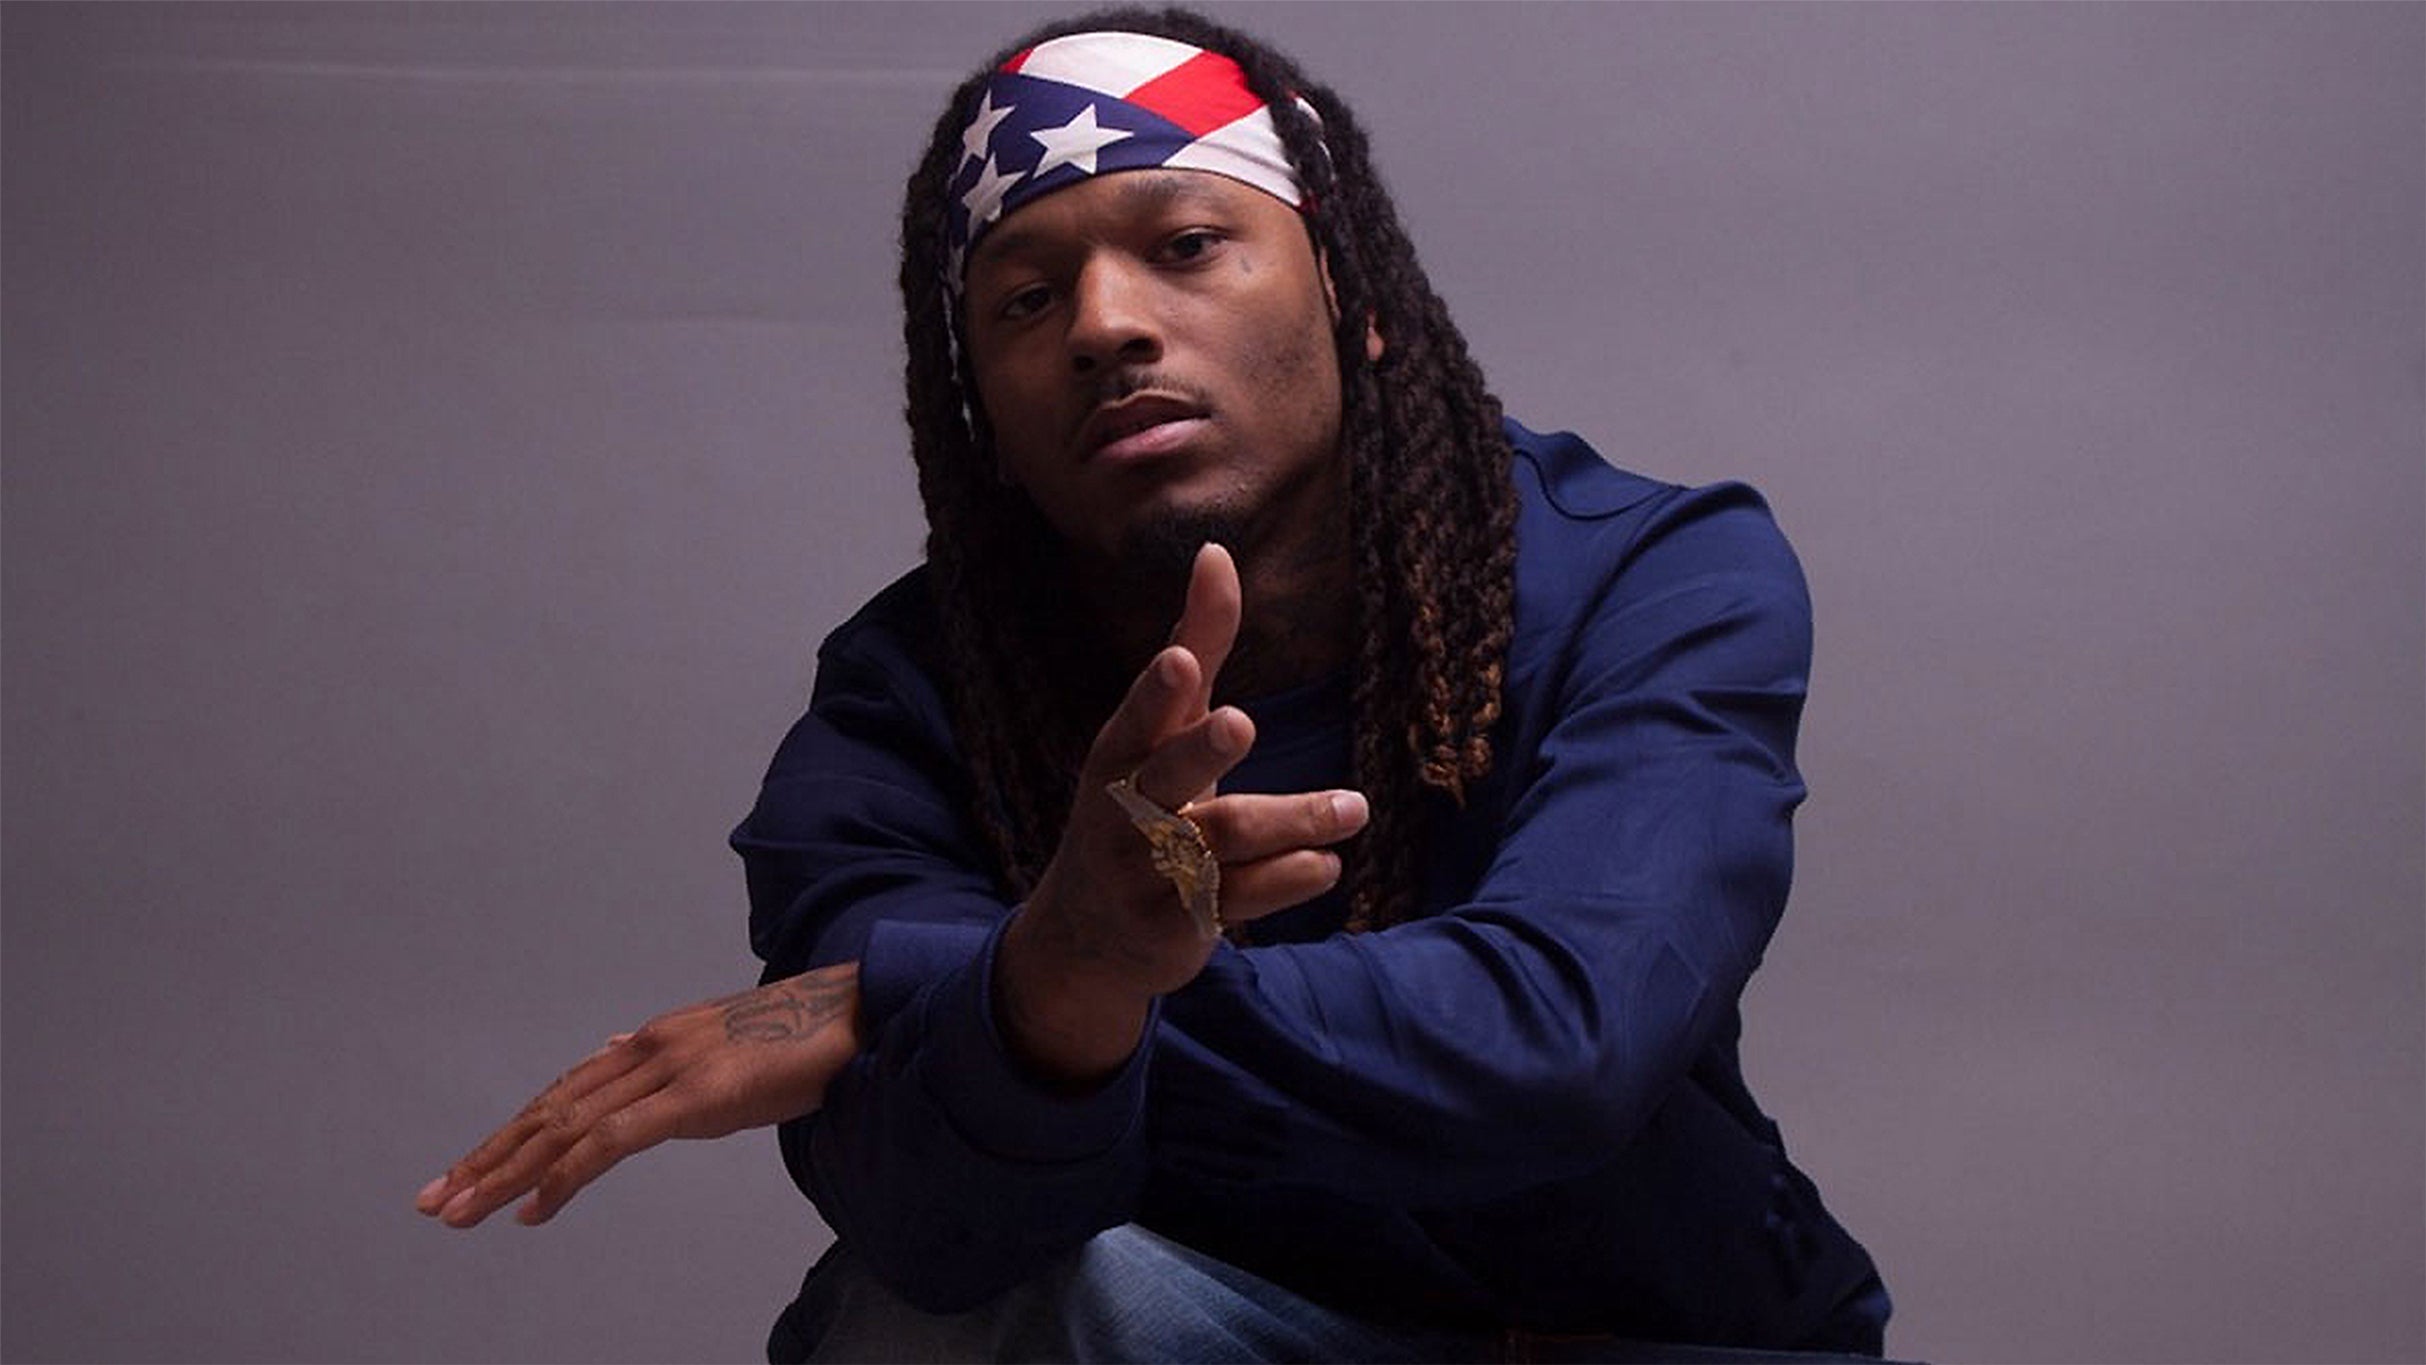 Montana of 300 in New York promo photo for Spotify presale offer code